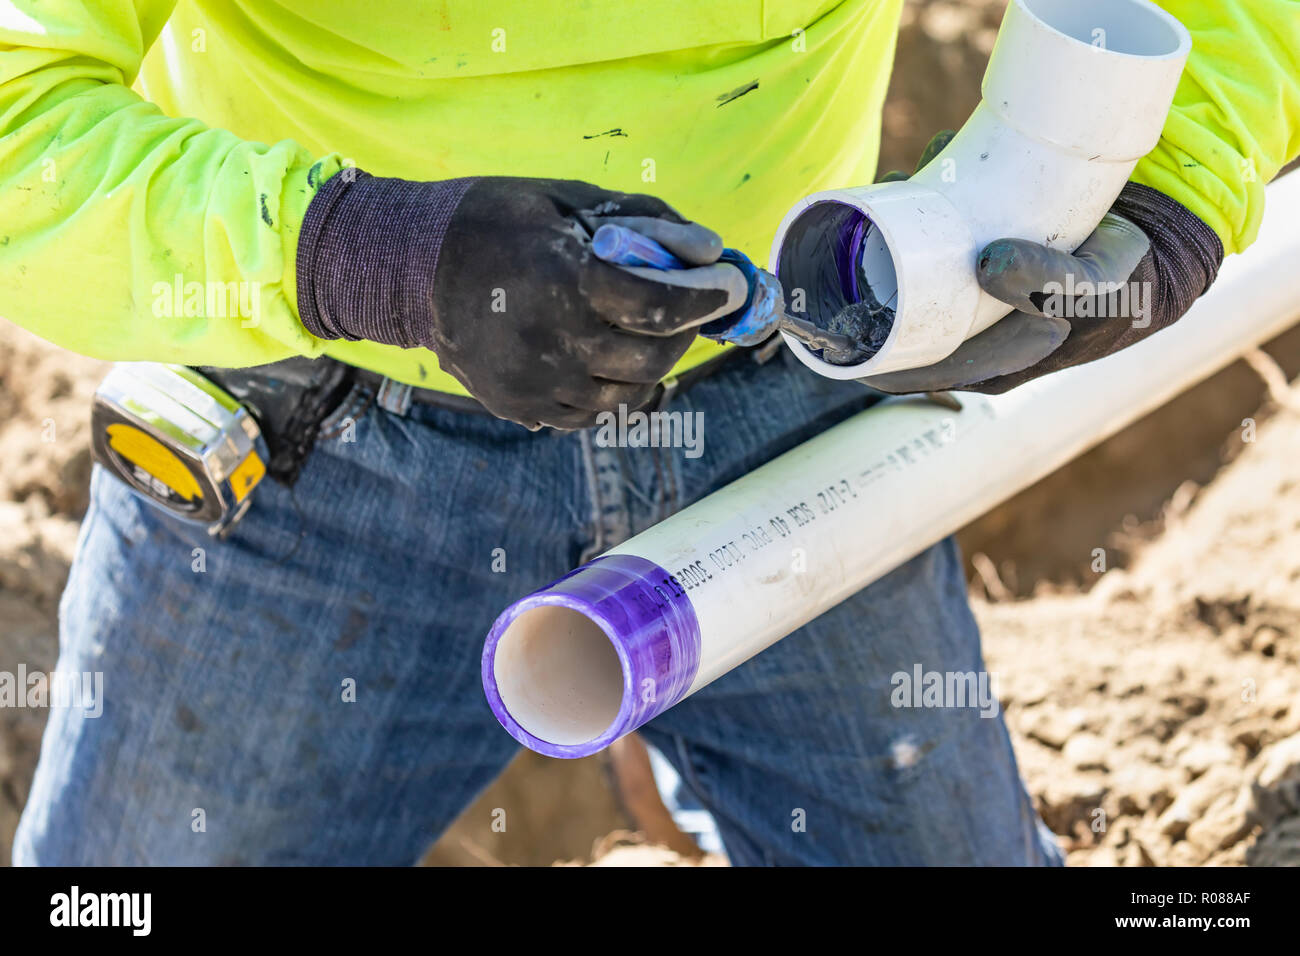 Plumber Applying Pipe Cleaner, Primer and Glue to PVC Pipe At Construction  Site Stock Photo - Alamy